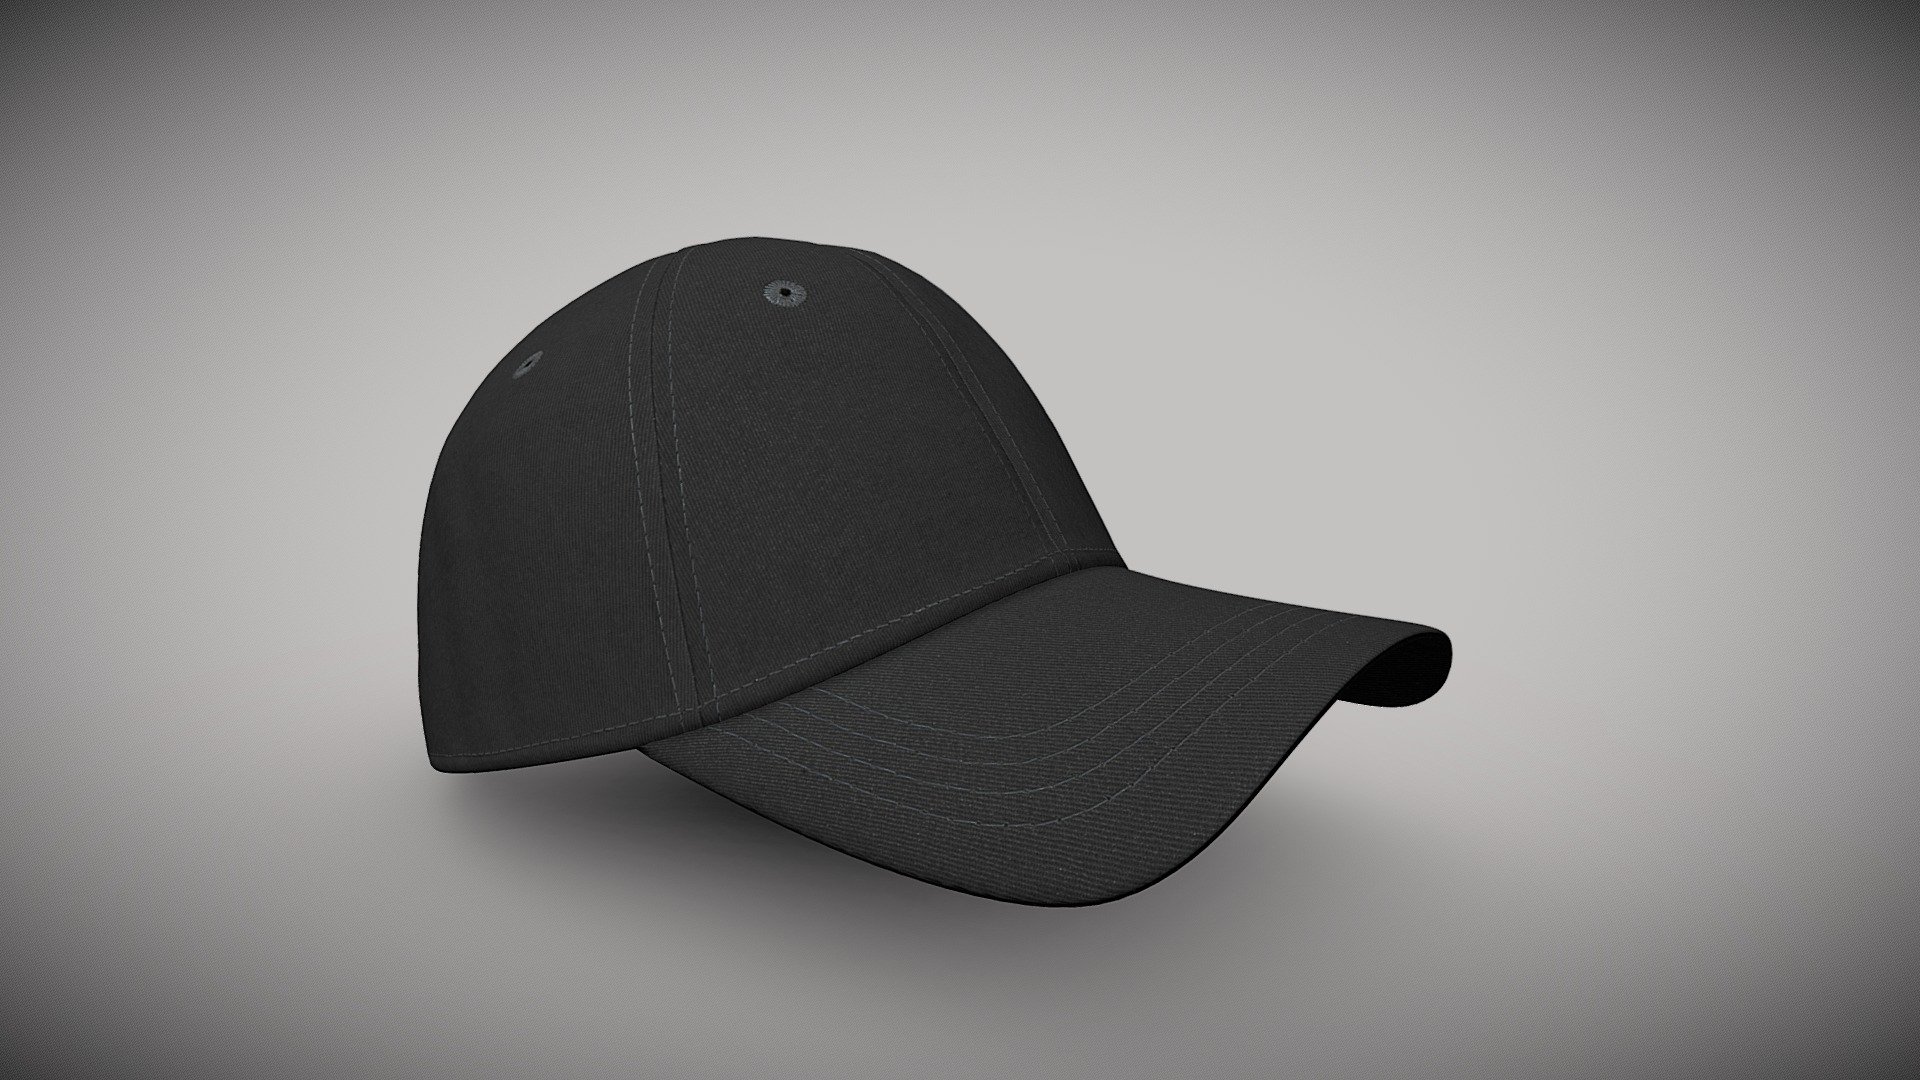 this is a realistic baseball cap. I designed it base on the model that the customer prepared. It's optimized for the AR application 3d model